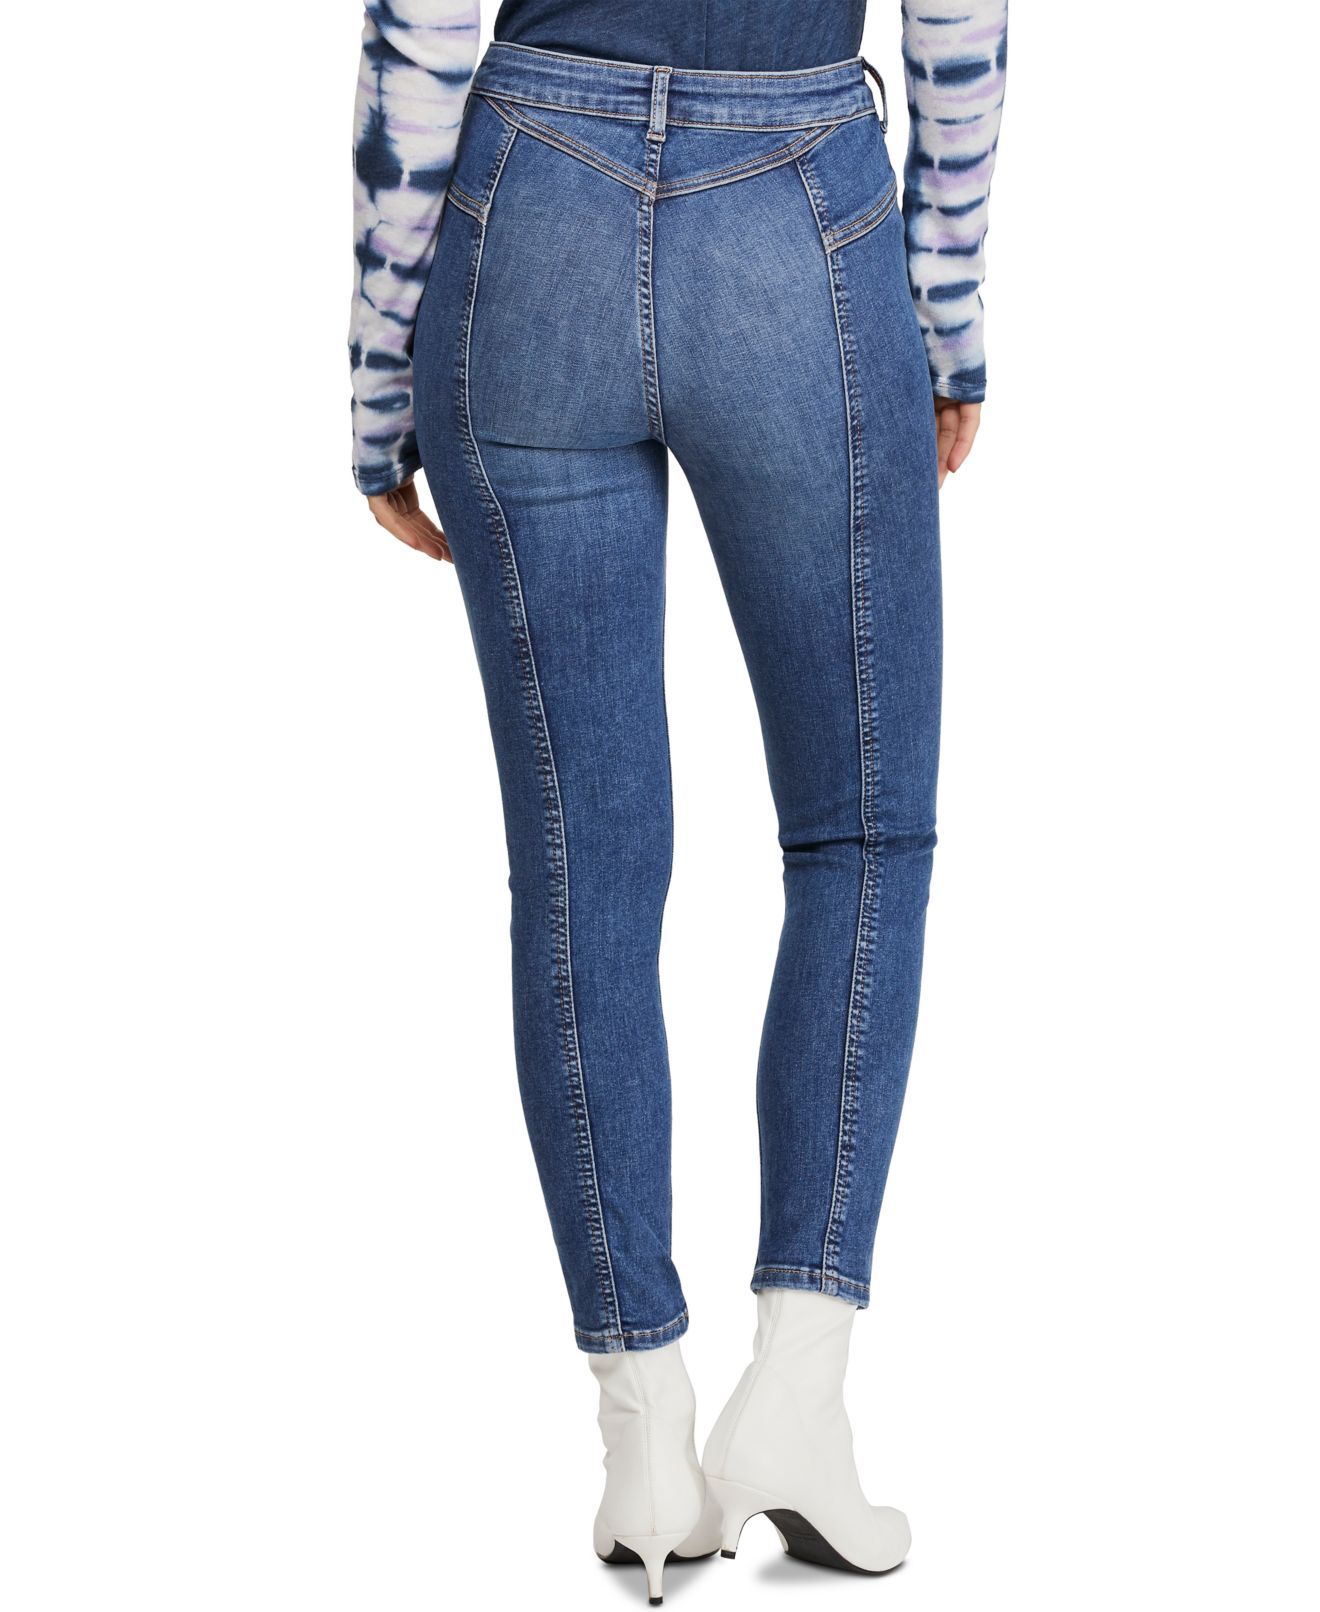 Color: Blues Size Type: Regular Bottoms Size (Women's): 26 Inseam: 26 Type: Jeans Style: Skinny Rise: Mid Material: Cotton Blends Fabric Wash: Dark Stretch: YES